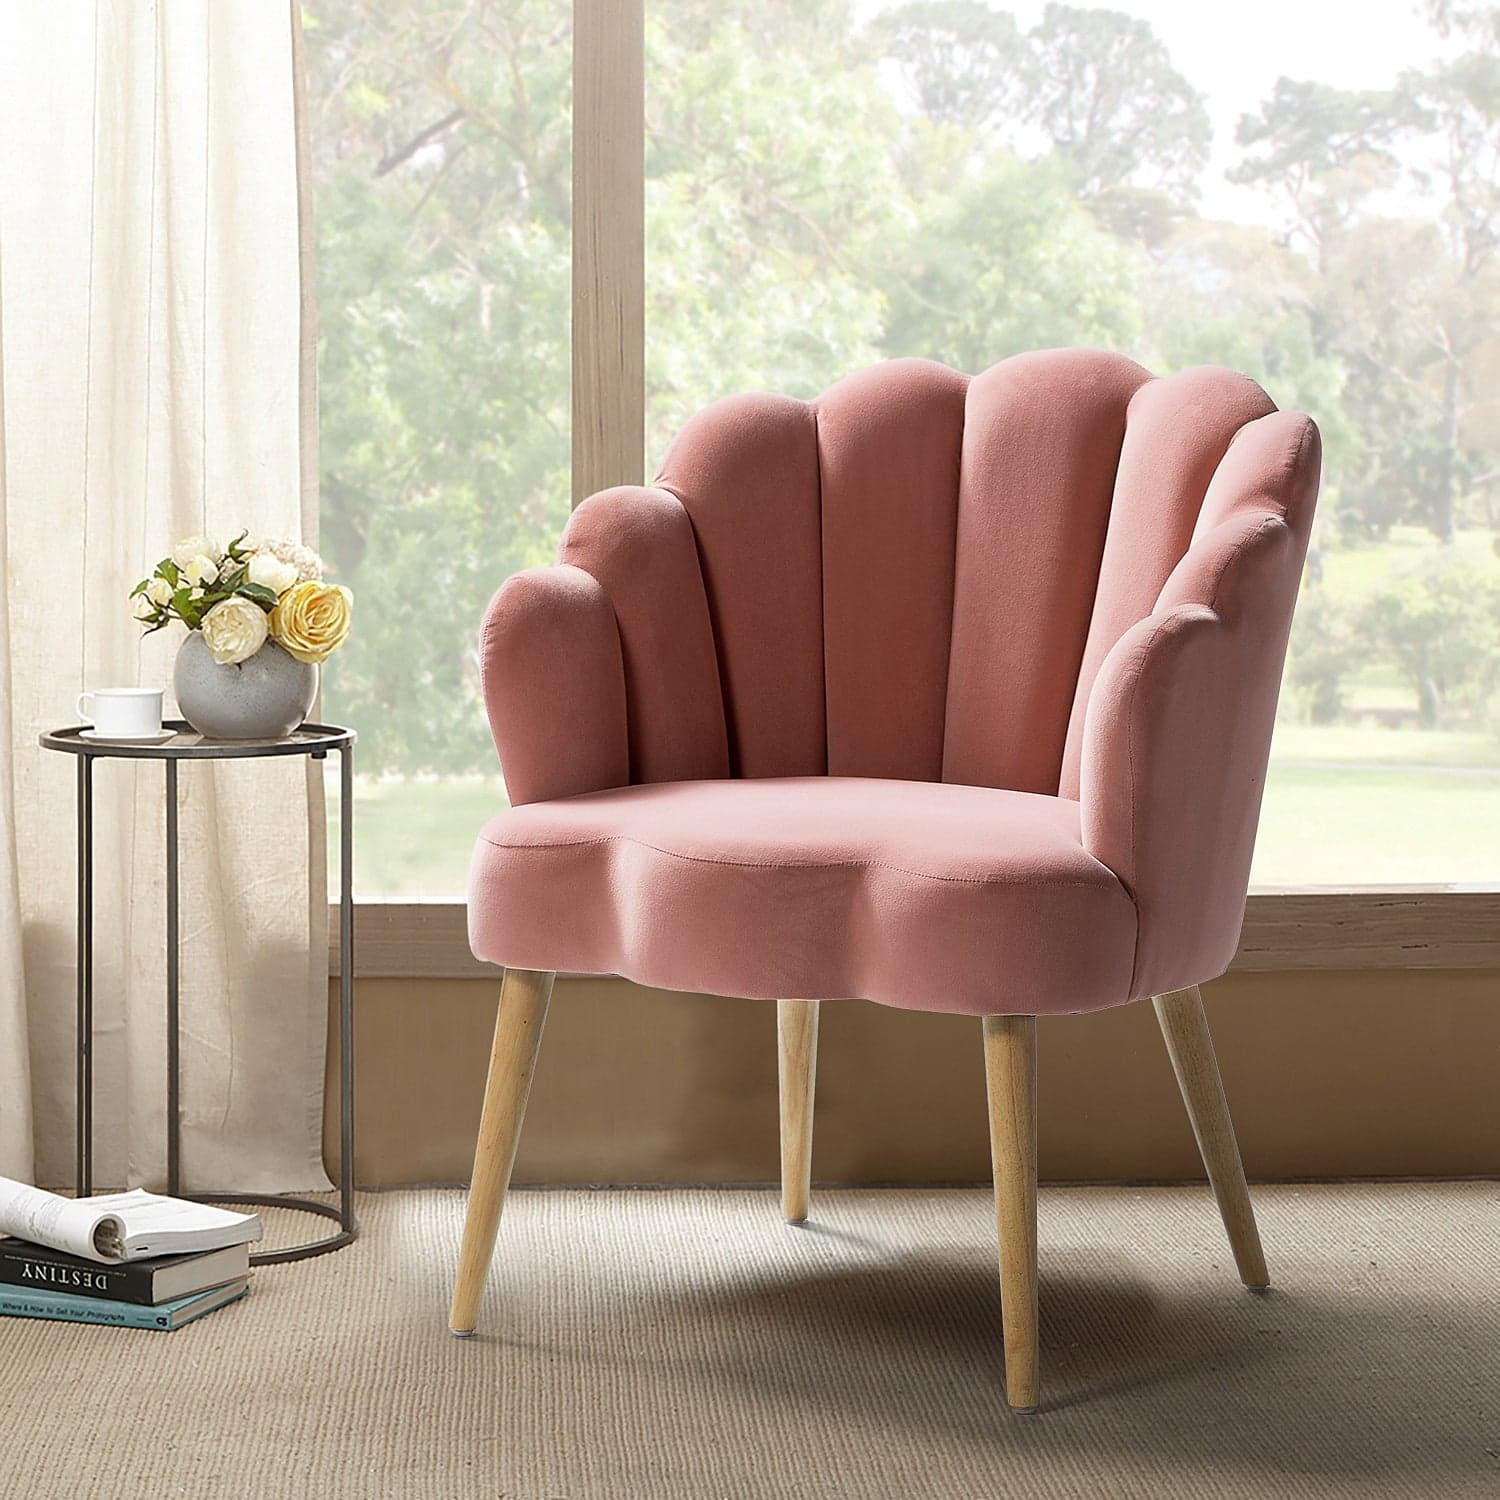 Make a Statement with a Scalloped Arm Chair